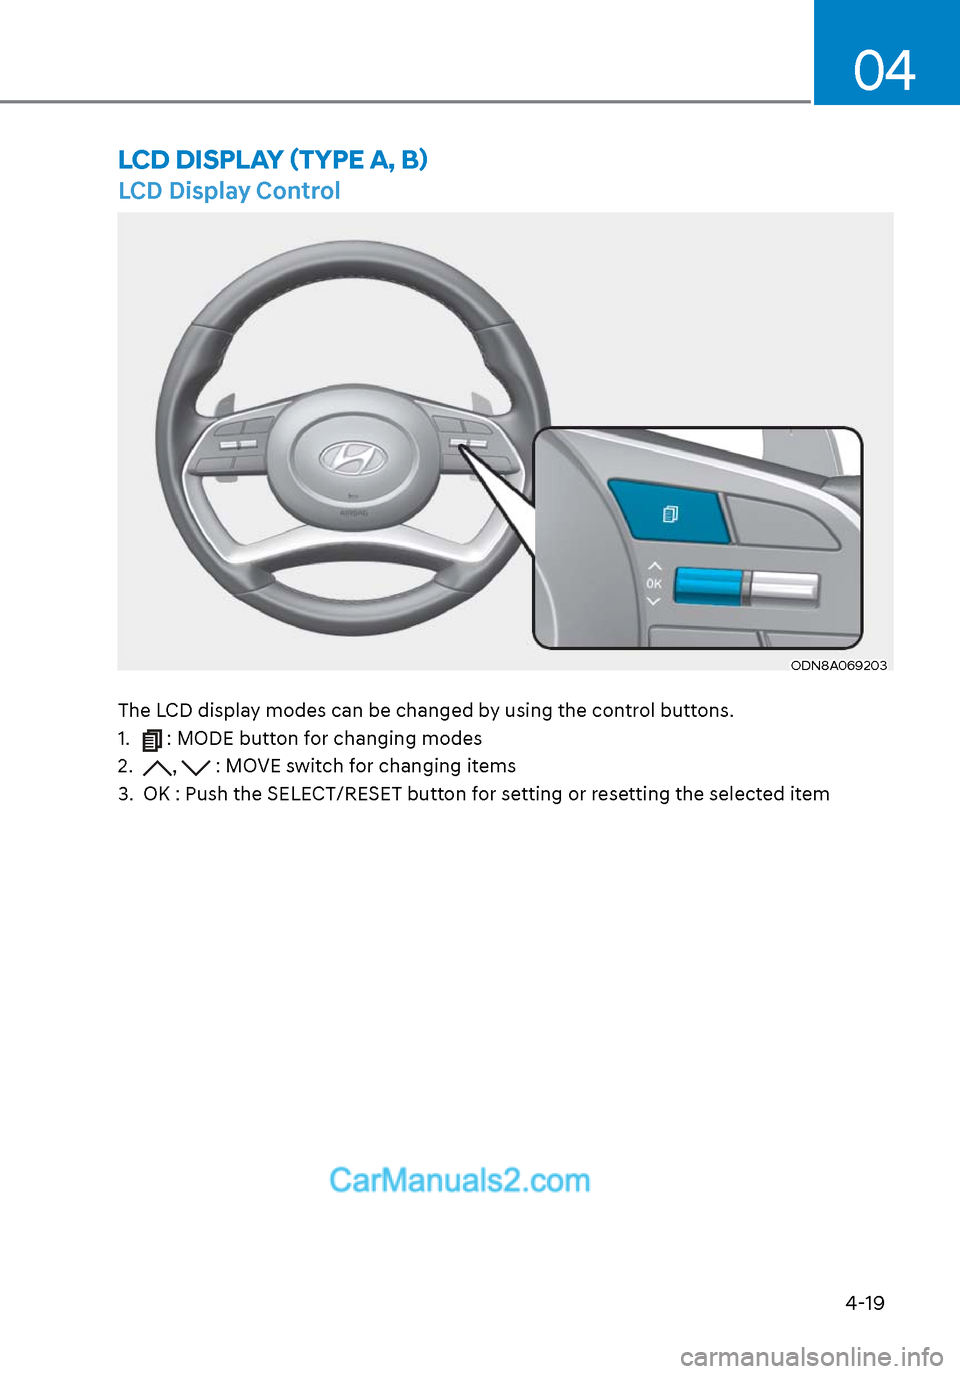 Hyundai Sonata 2020  Owners Manual 4-19
04
LCD Display Control
ODN8A069203ODN8A069203
The LCD display modes can be changed by using the control buttons.
1. 
 : MODE button for changing modes
2. 
,  : MOVE switch for changing items
3.  